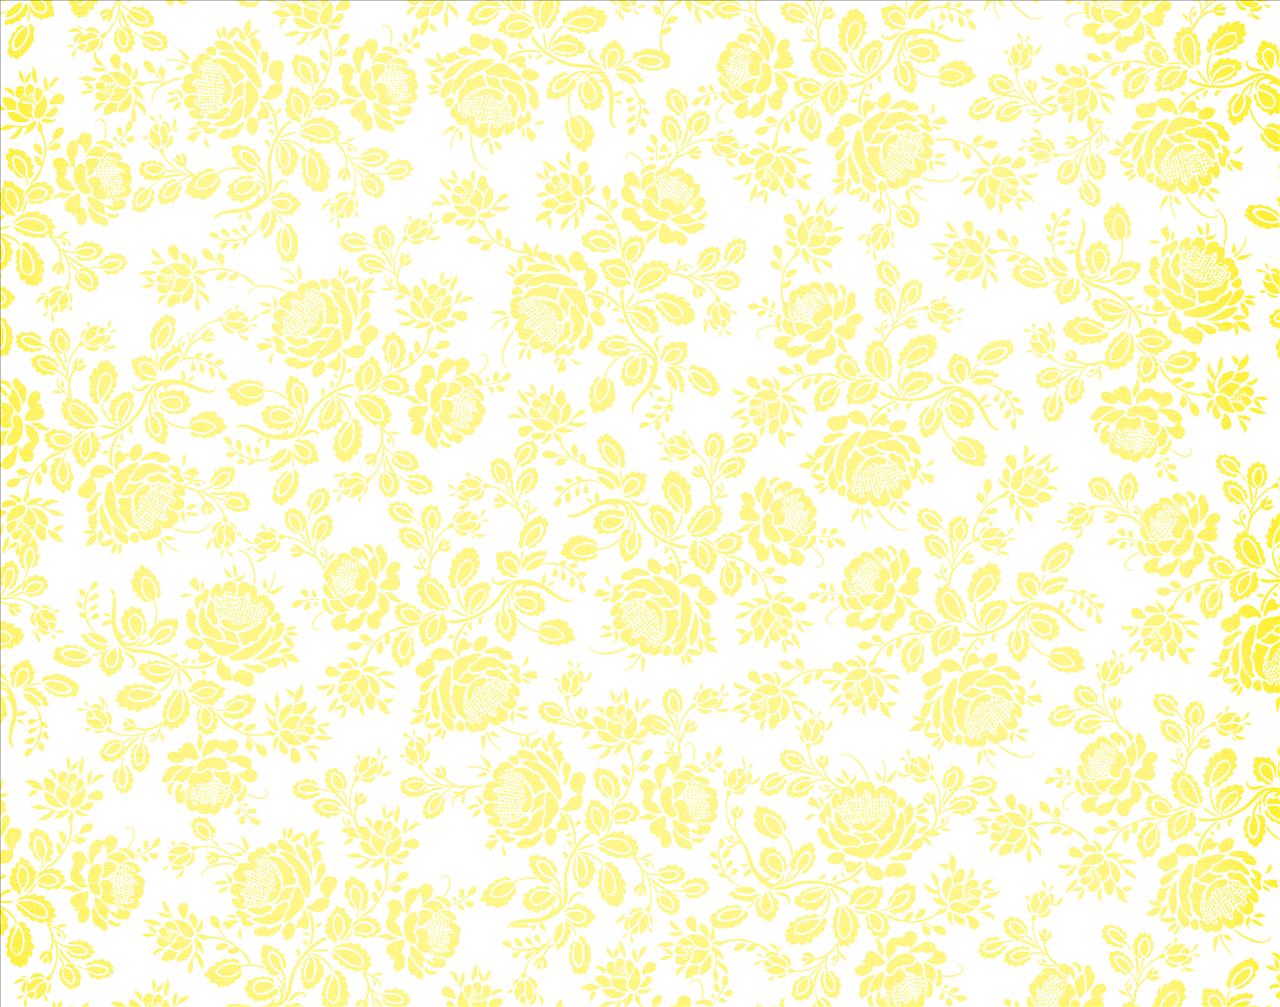 Yellow Roses Backgrounds